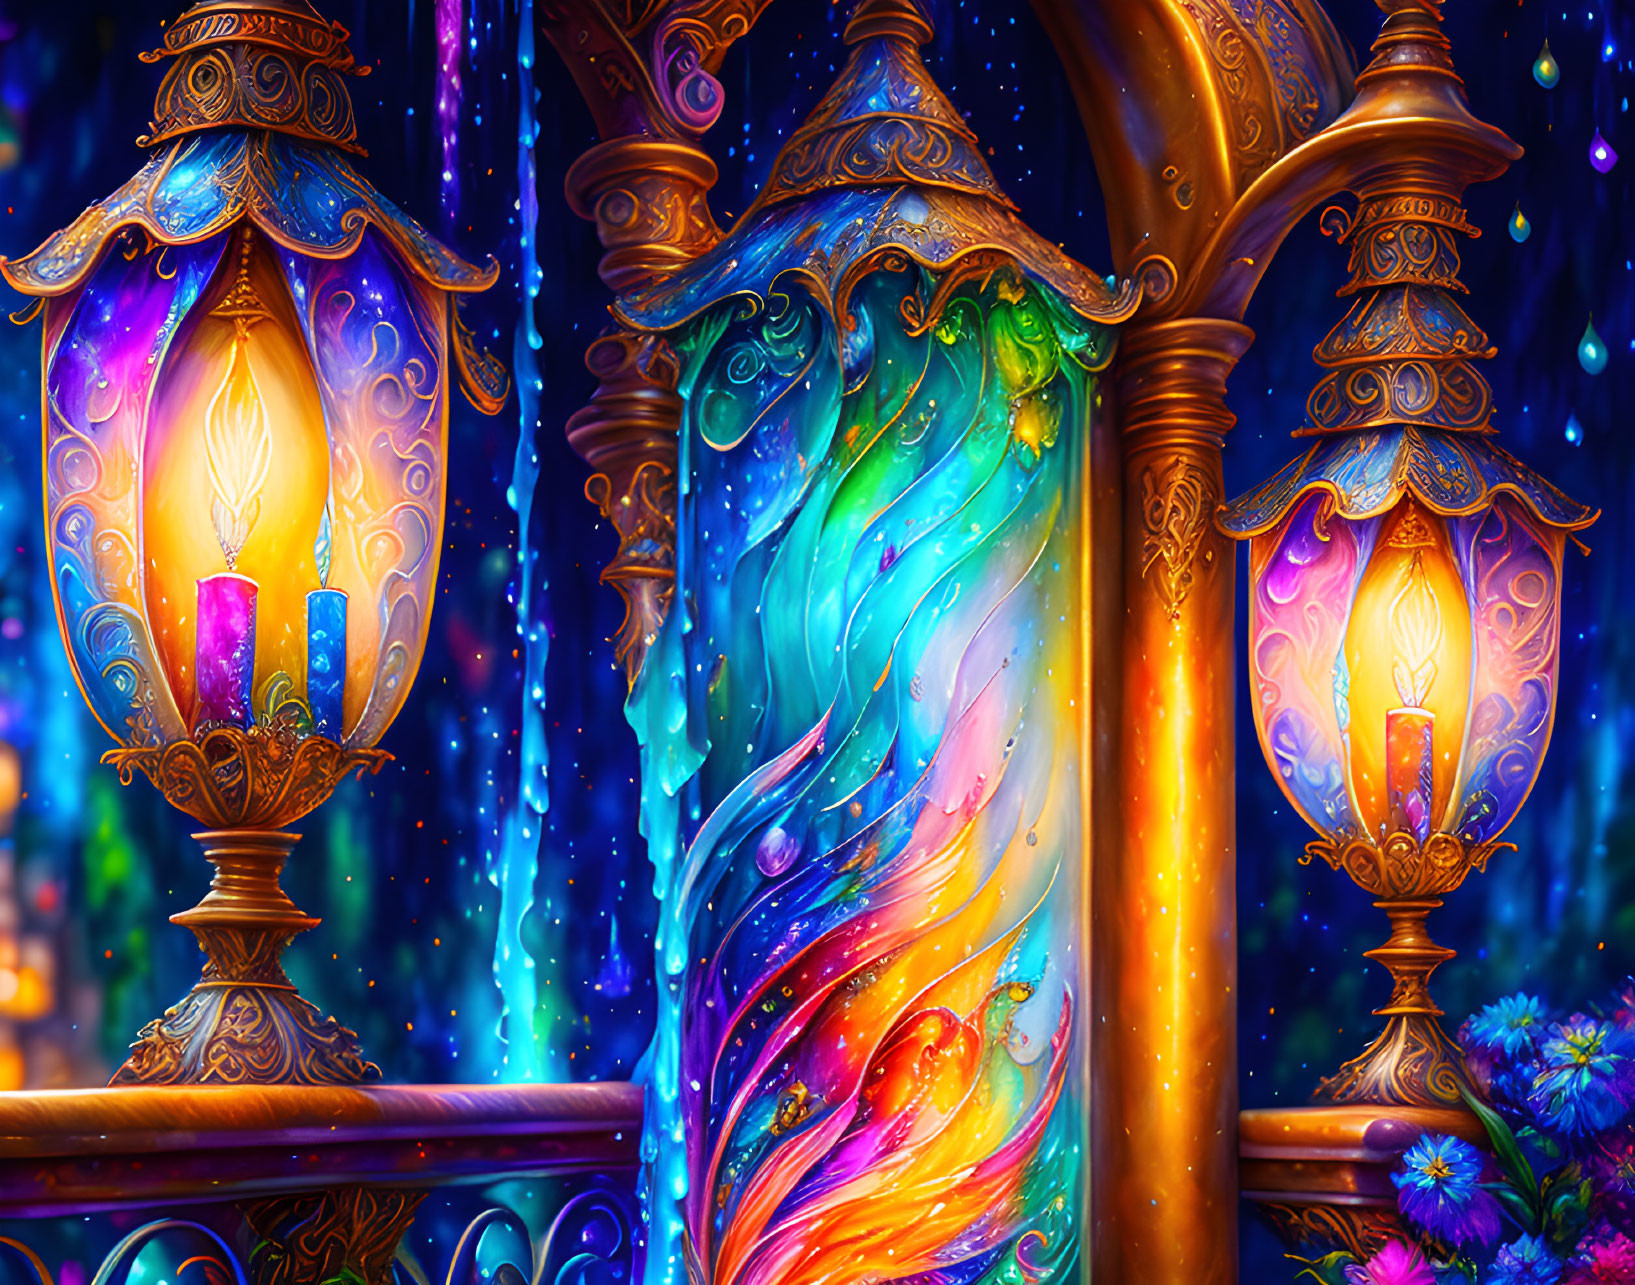 Colorful Fantasy Scene with Glowing Lanterns and Swirling Patterns